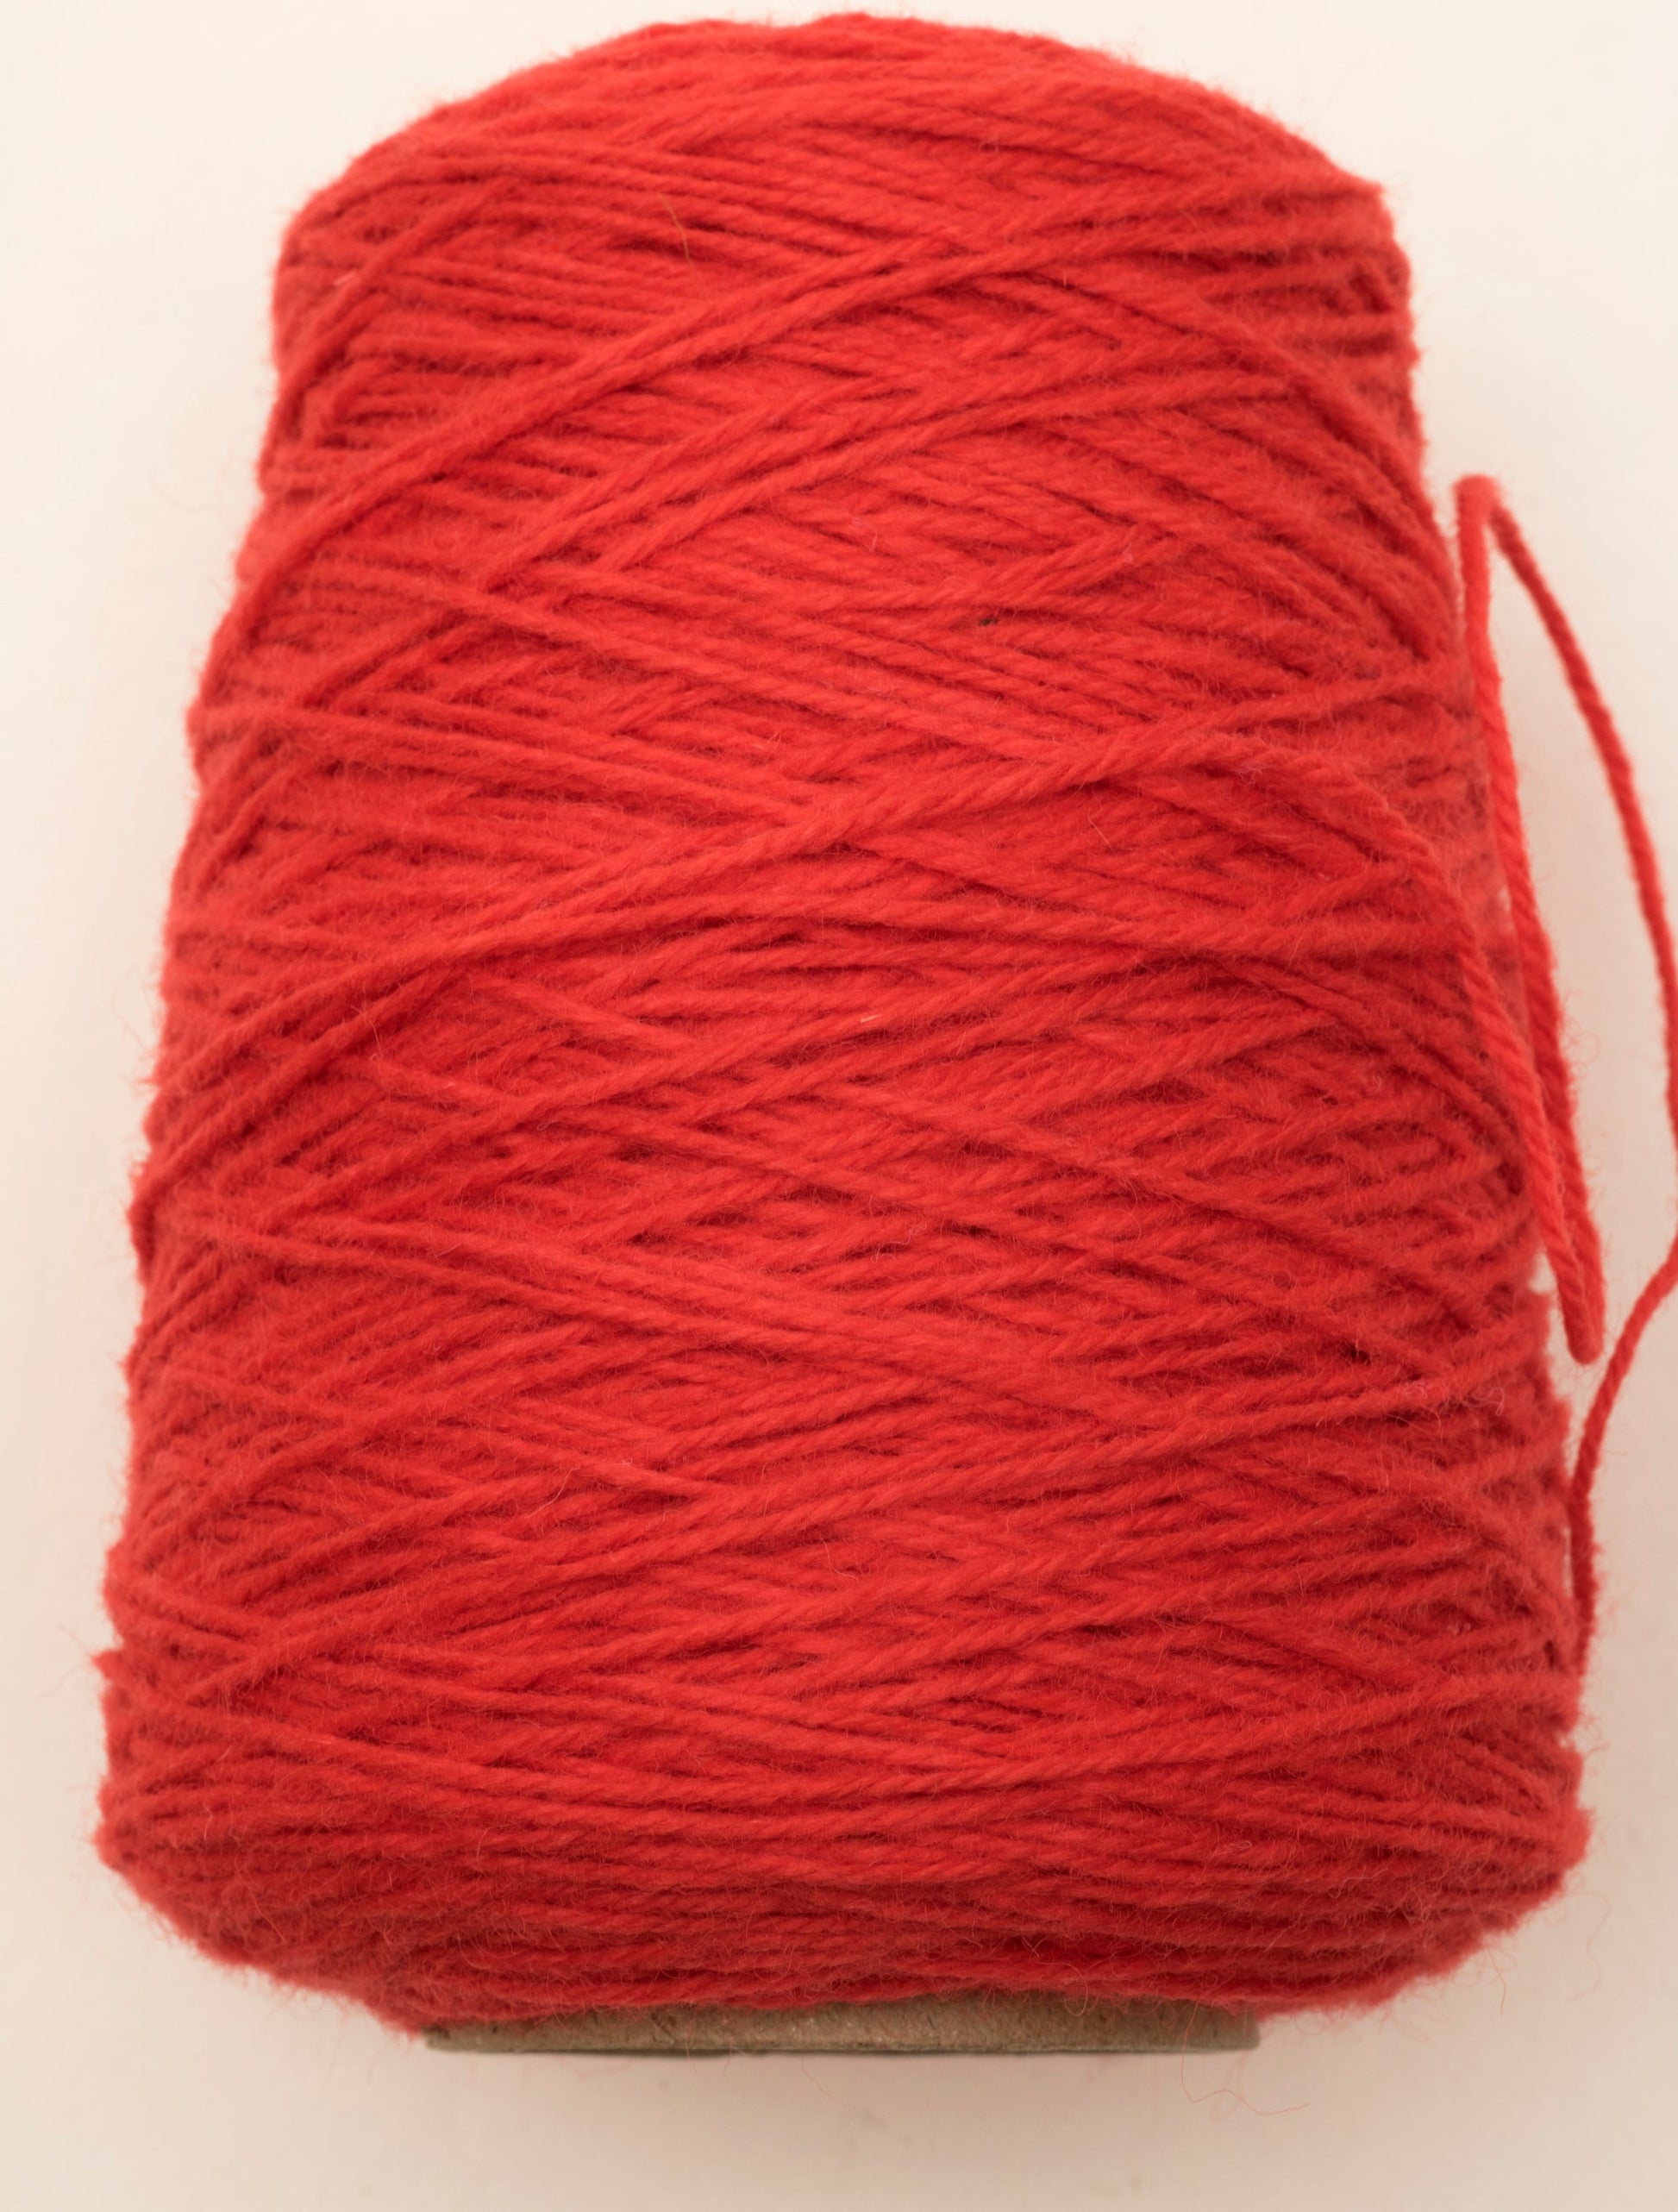 Bright Red 100% rug wool on cone for tufting – Rug Makers Yarn